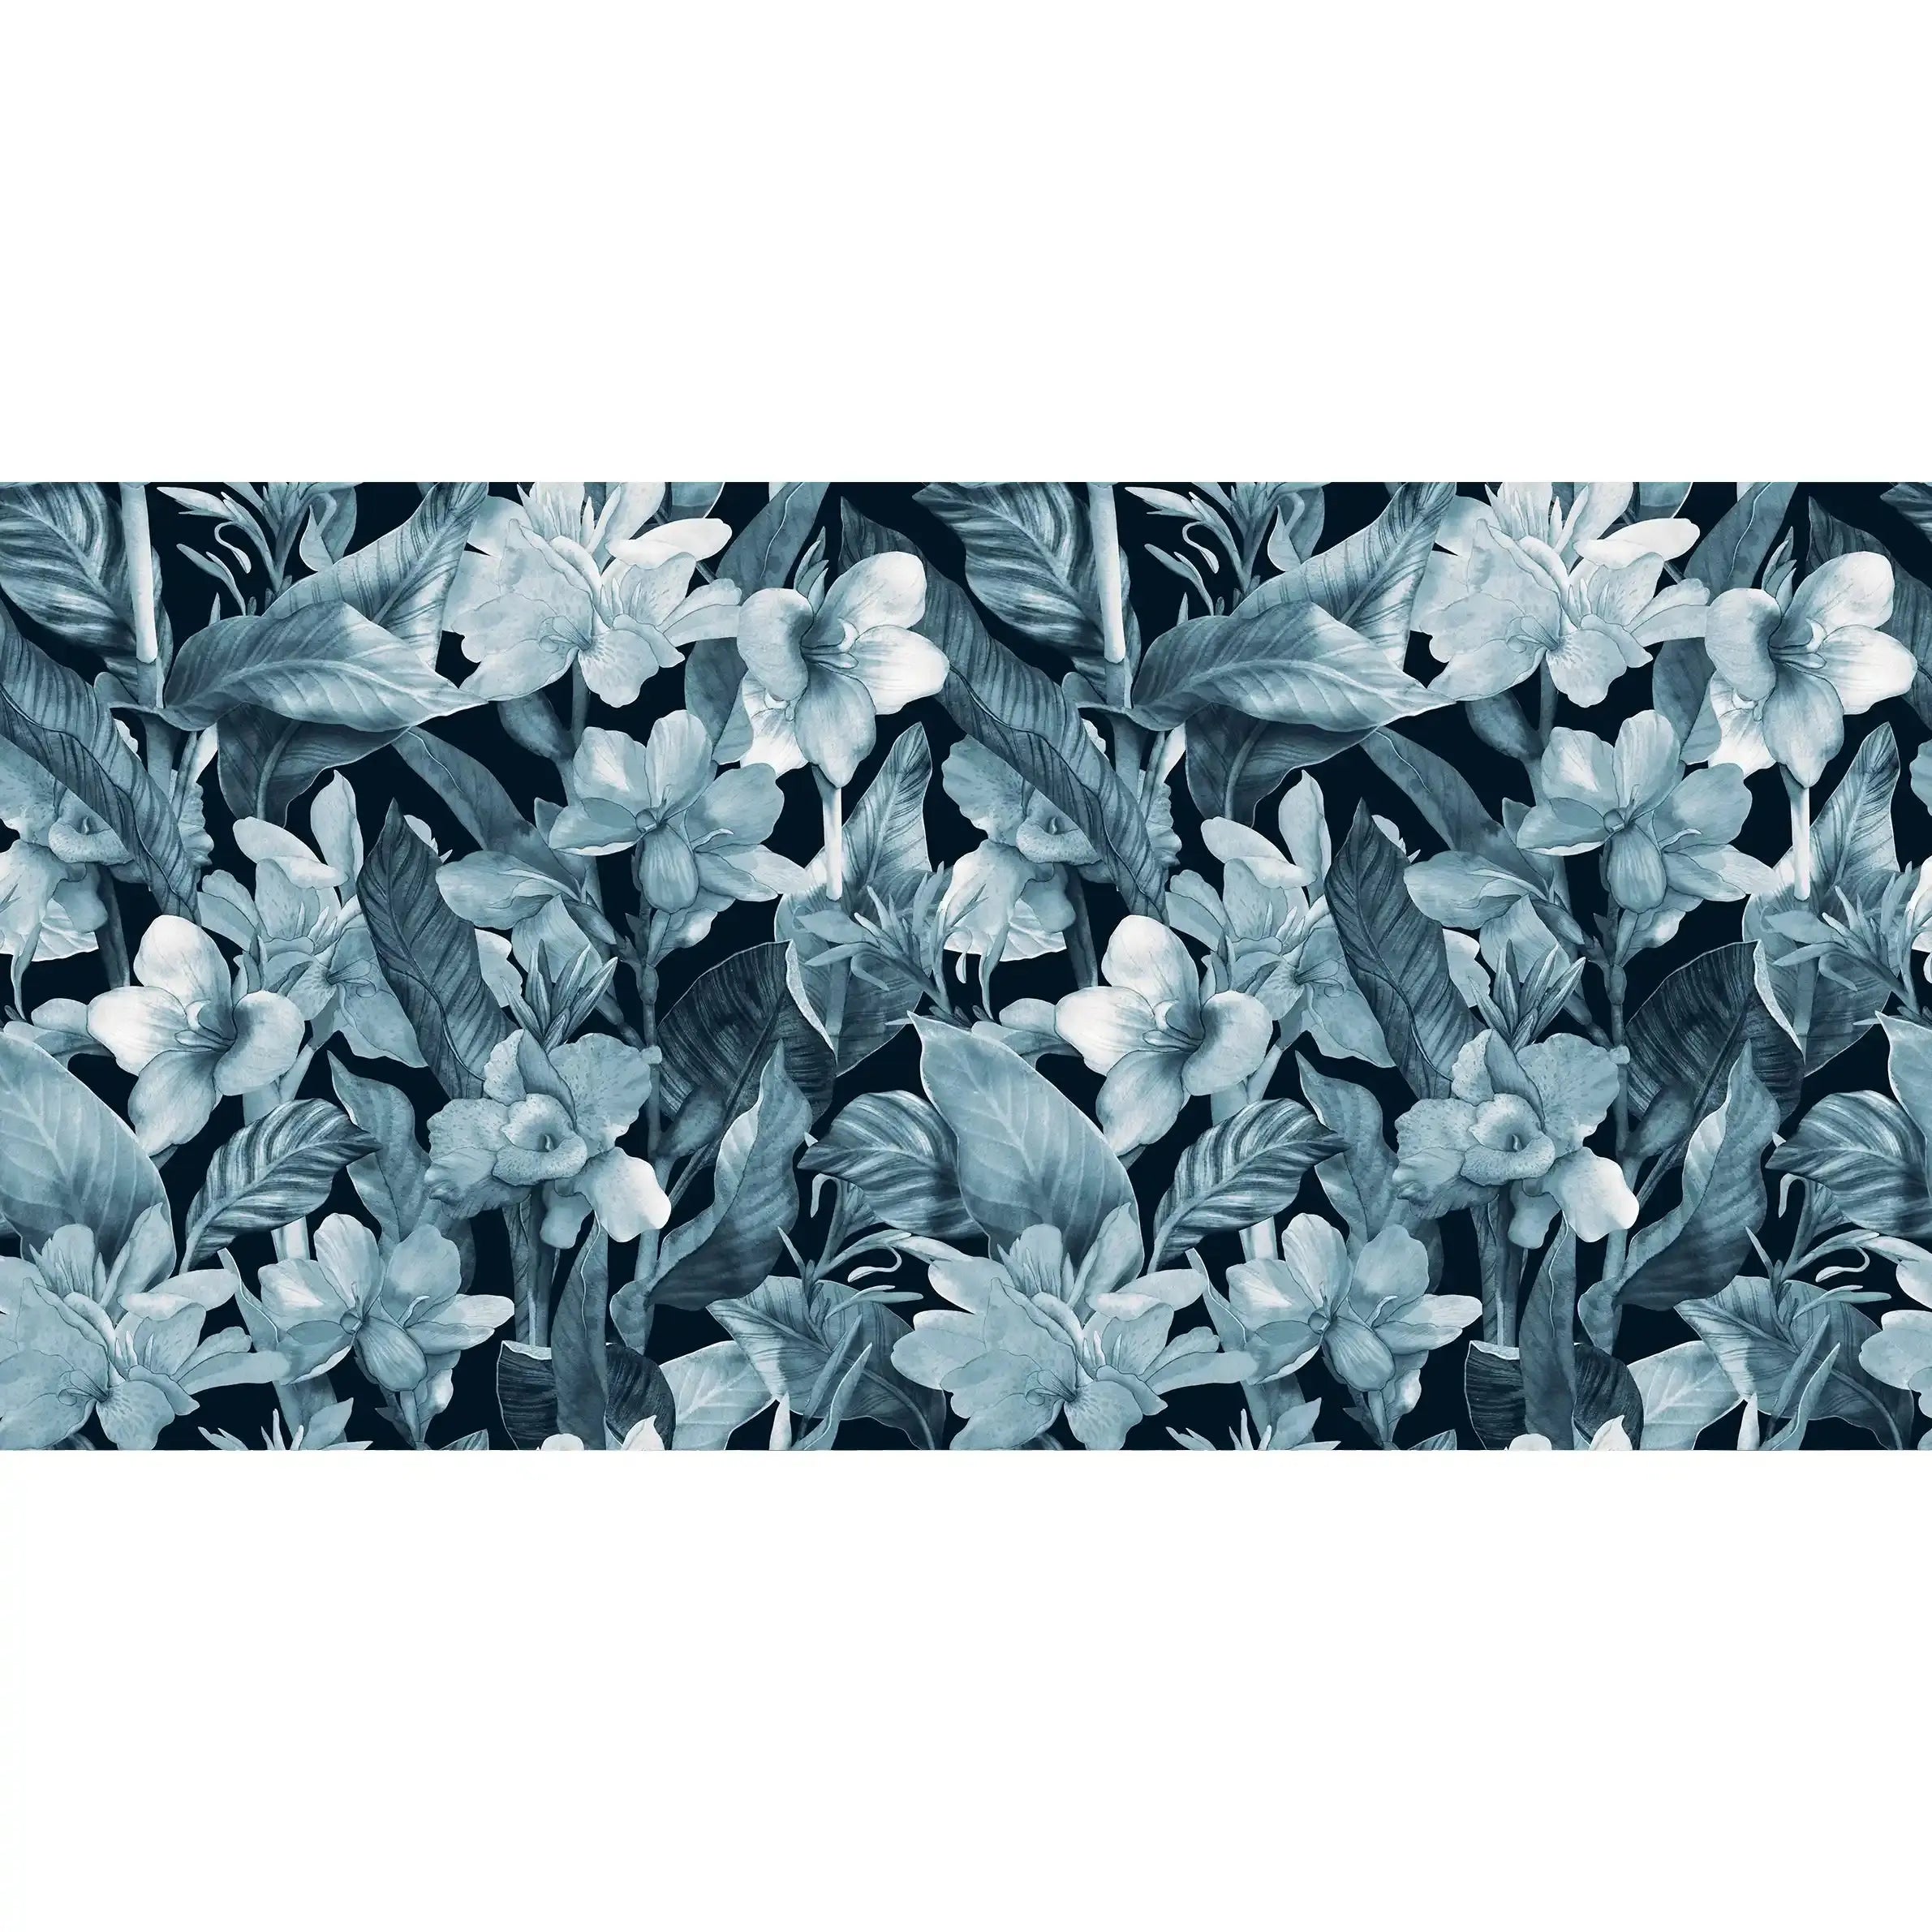 3074-B / Botanical Peel and Stick Wallpaper: Blue Floral & Black Leaf Pattern, Perfect for Accent Wall Decor - Artevella